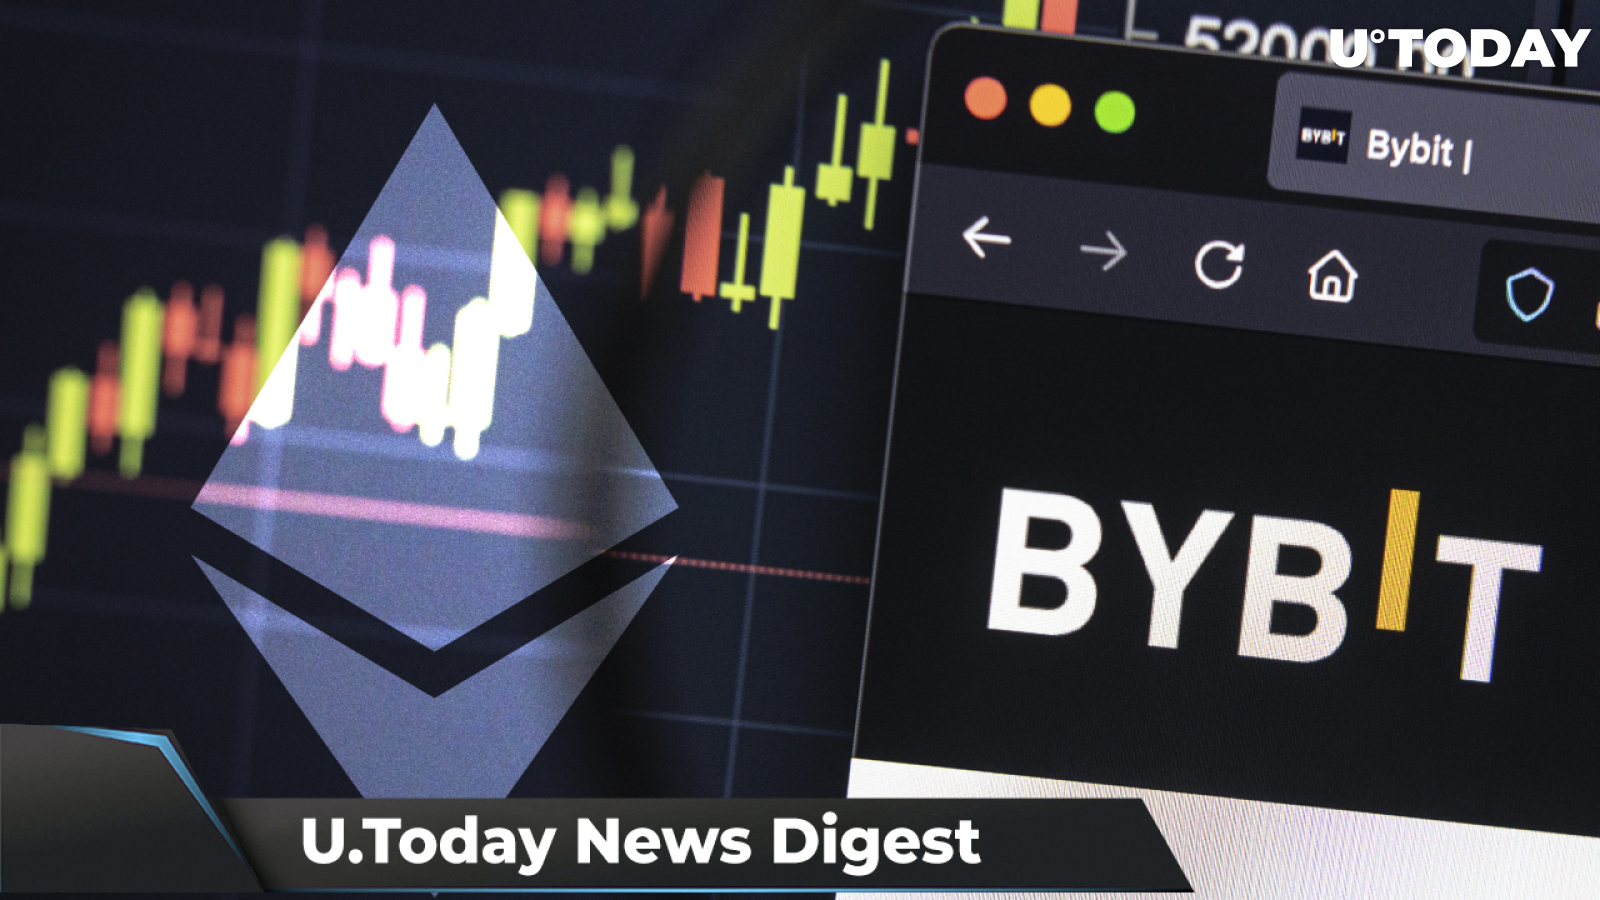 SHIB Available for Spot Trading on Bybit, New Ethereum Update to Go Live Soon, Craig Wright to Pay $100 Million in Damages: Crypto News Digest by U.Today